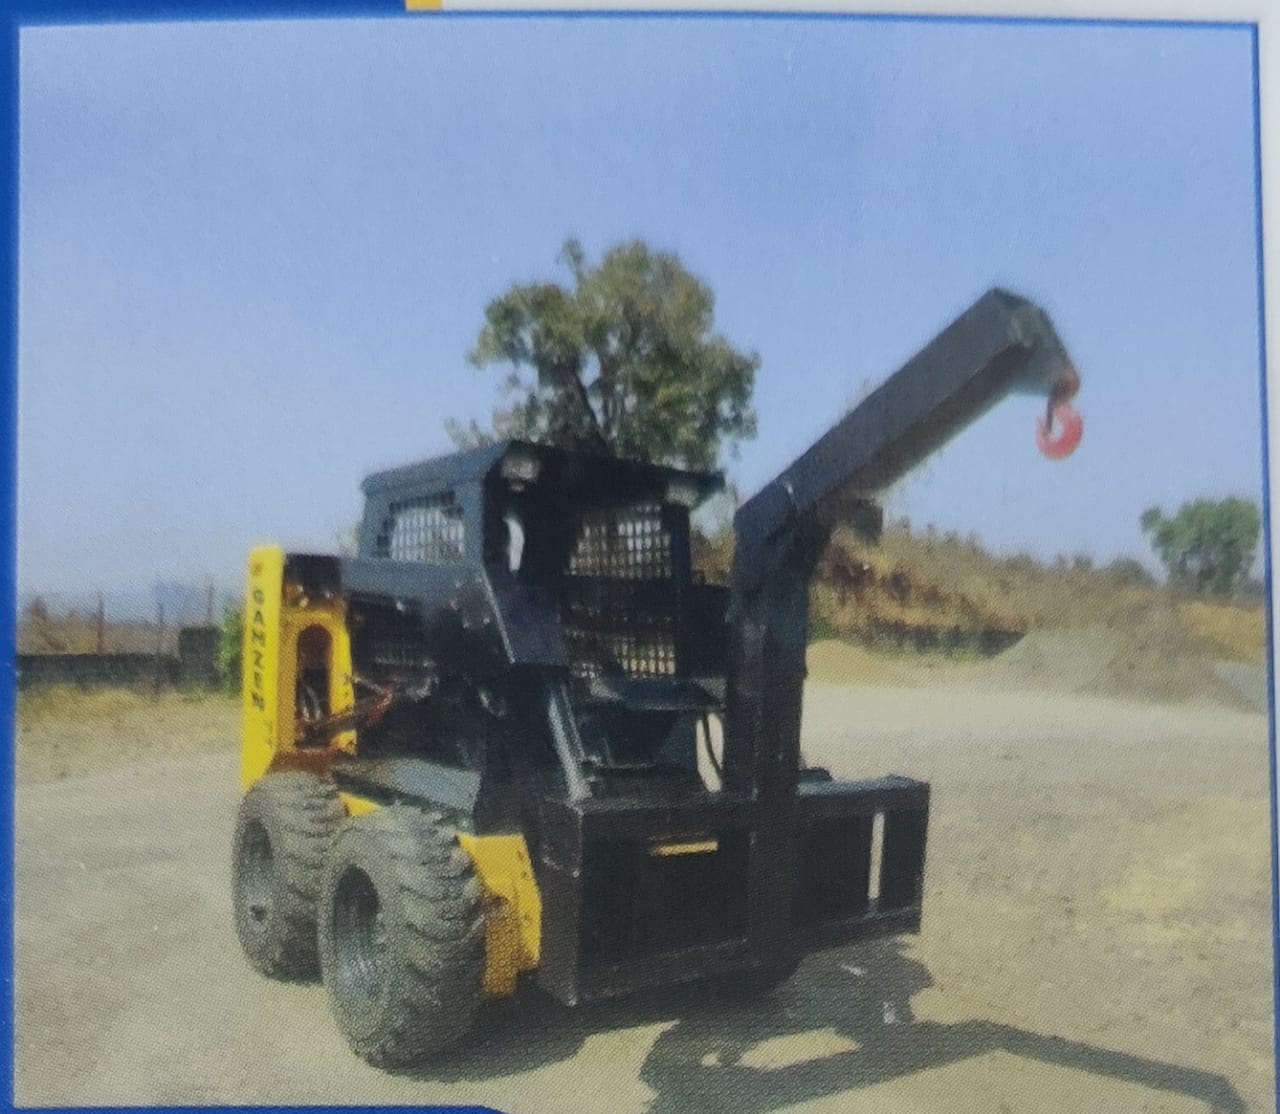 skid steer lifting hook attachment